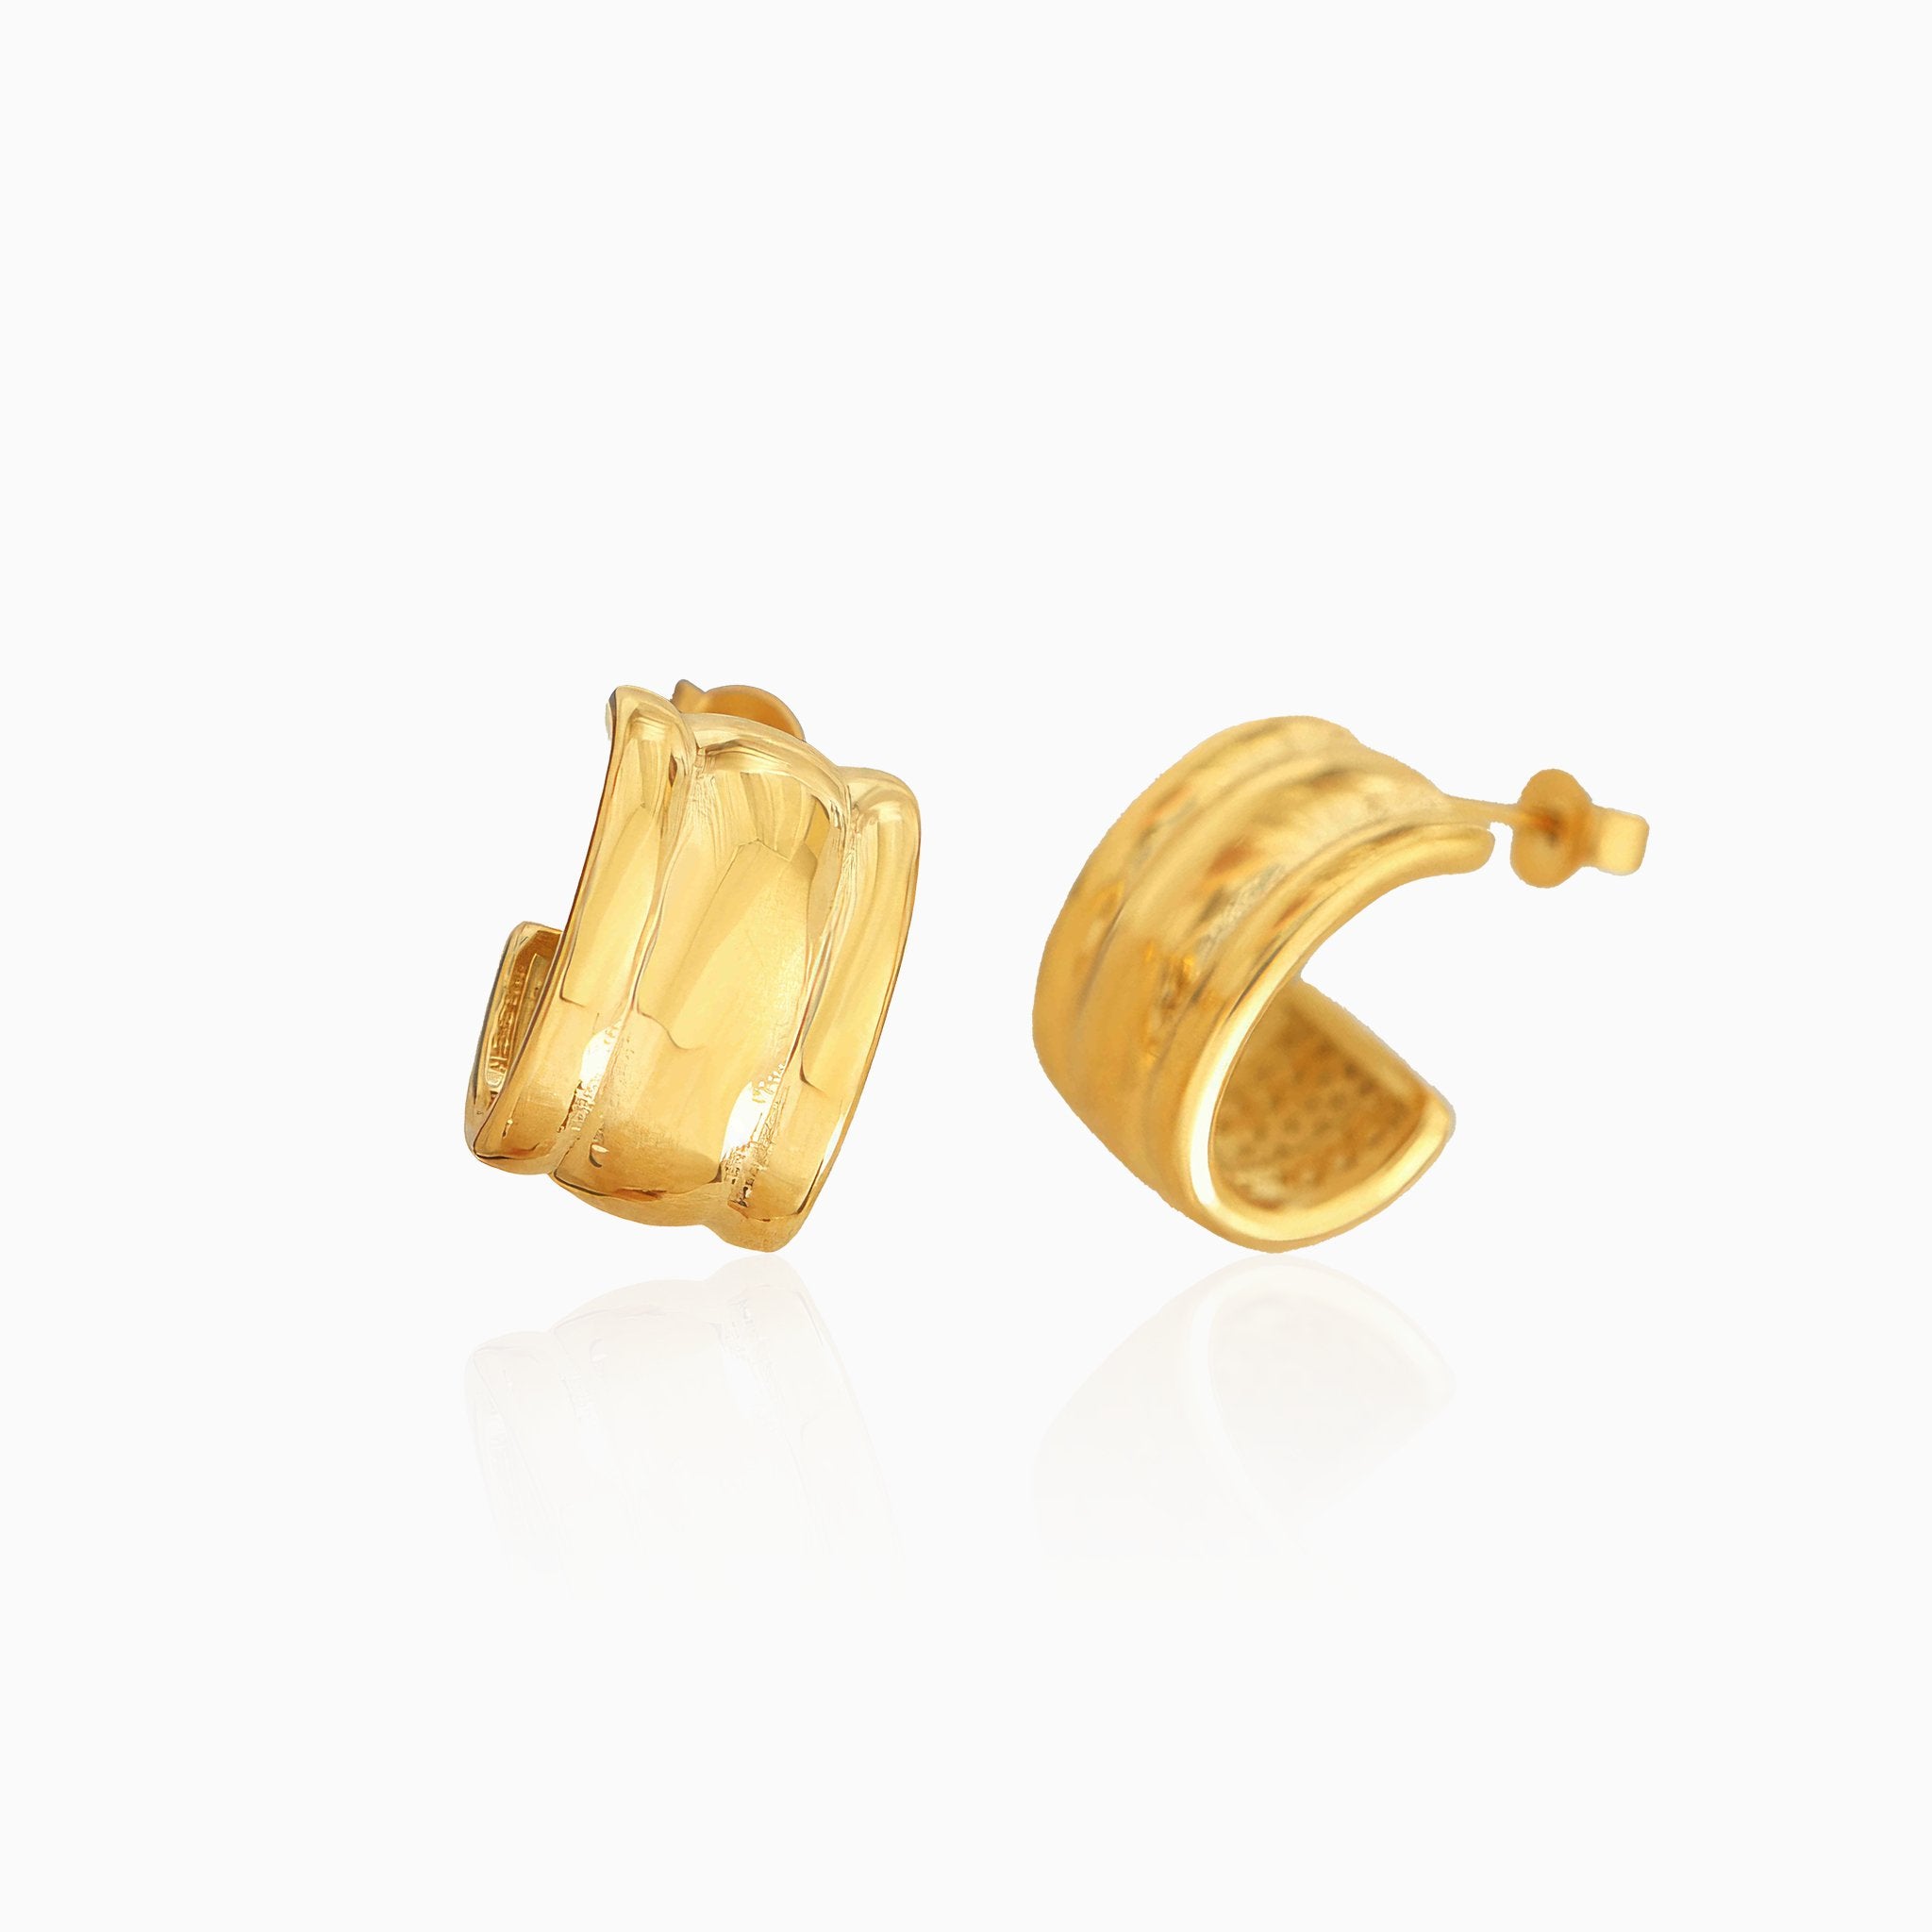 C-Shaped Embossed Minimalist Versatile Earrings - Nobbier - Earring - 18K Gold And Titanium PVD Coated Jewelry